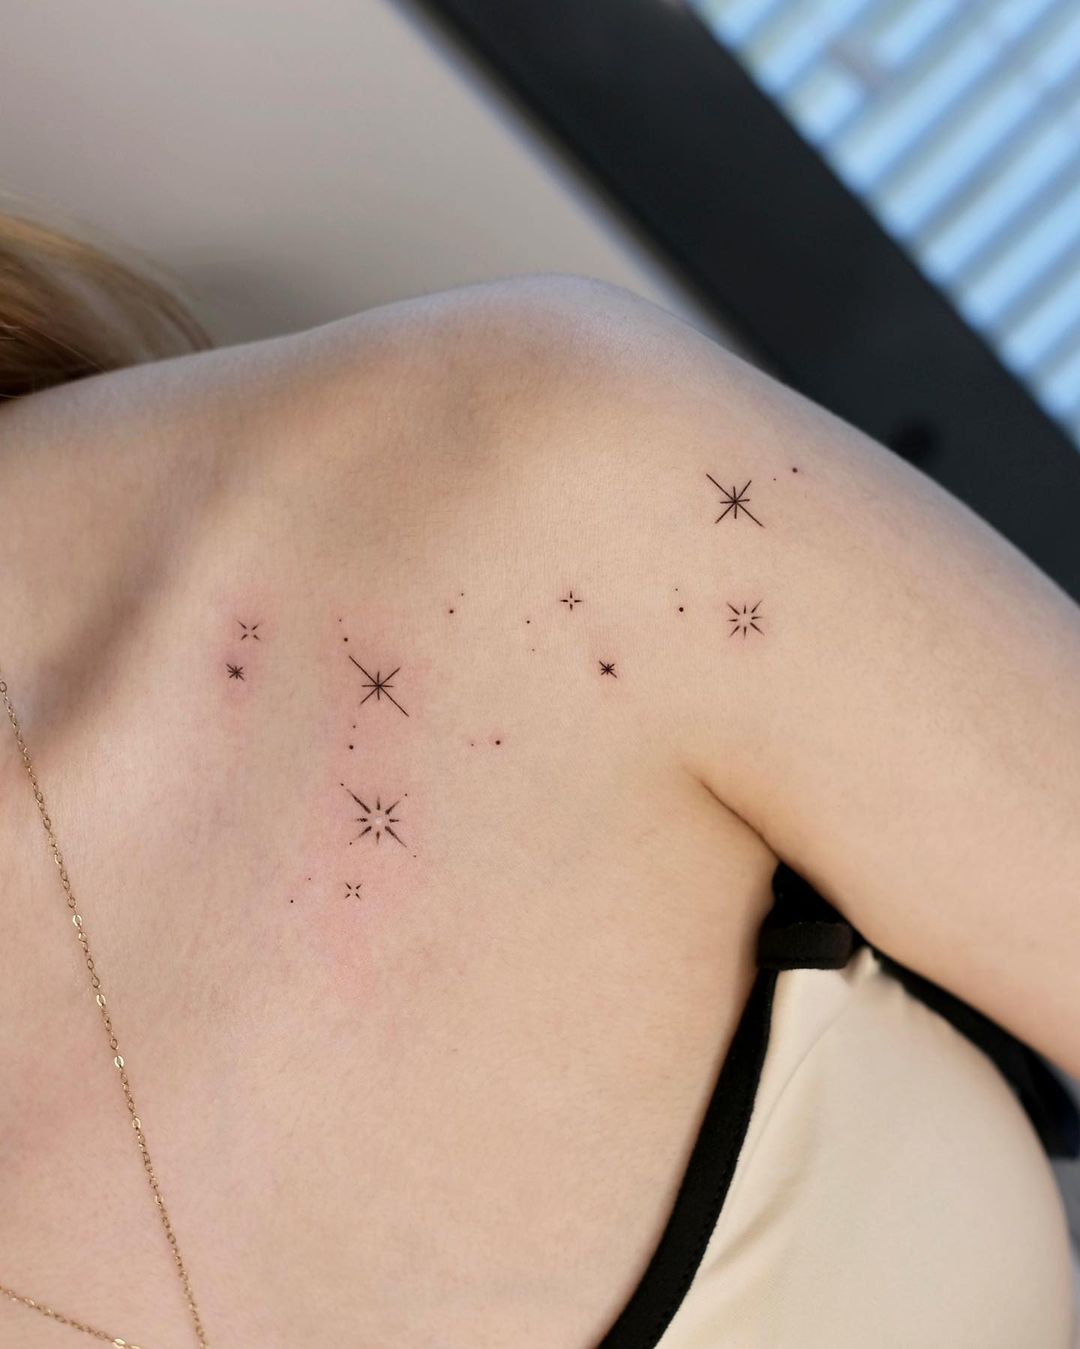 star tattoo on shoulder by iotattooing